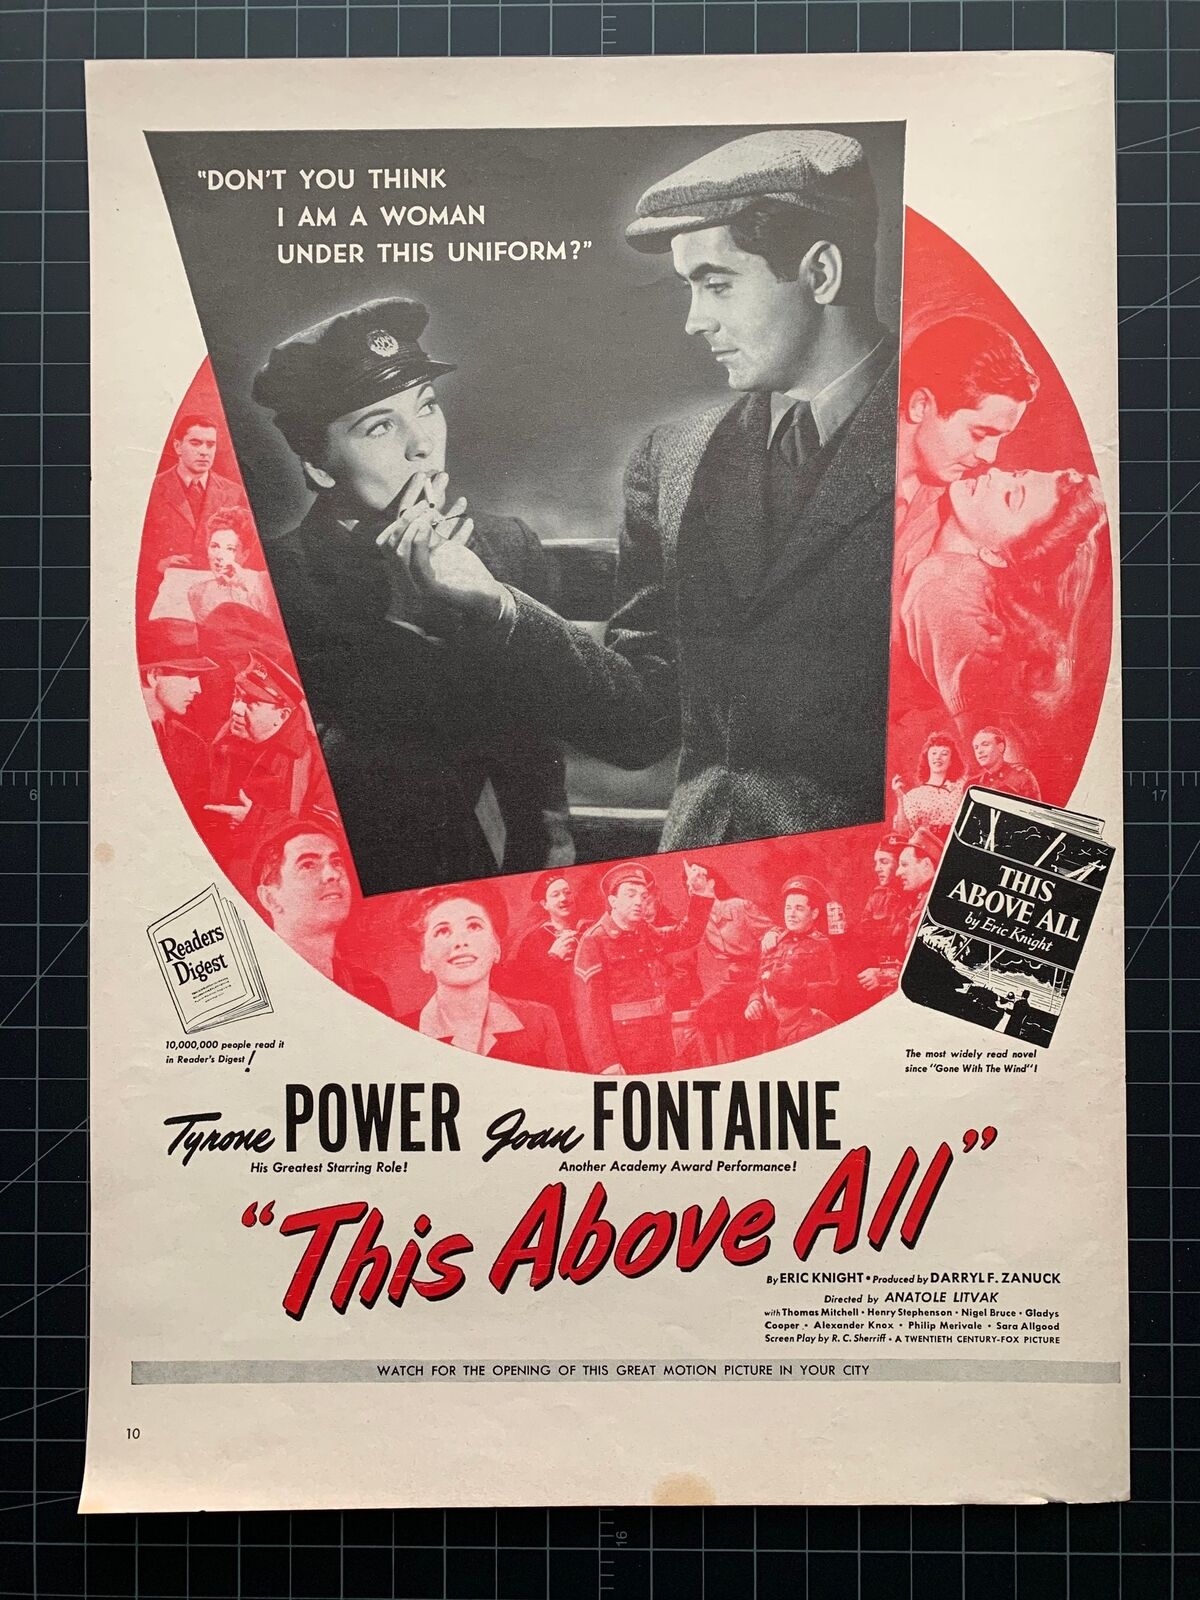 Vintage 1942 “This Above All” Film, Joan Fontaine Print Ad